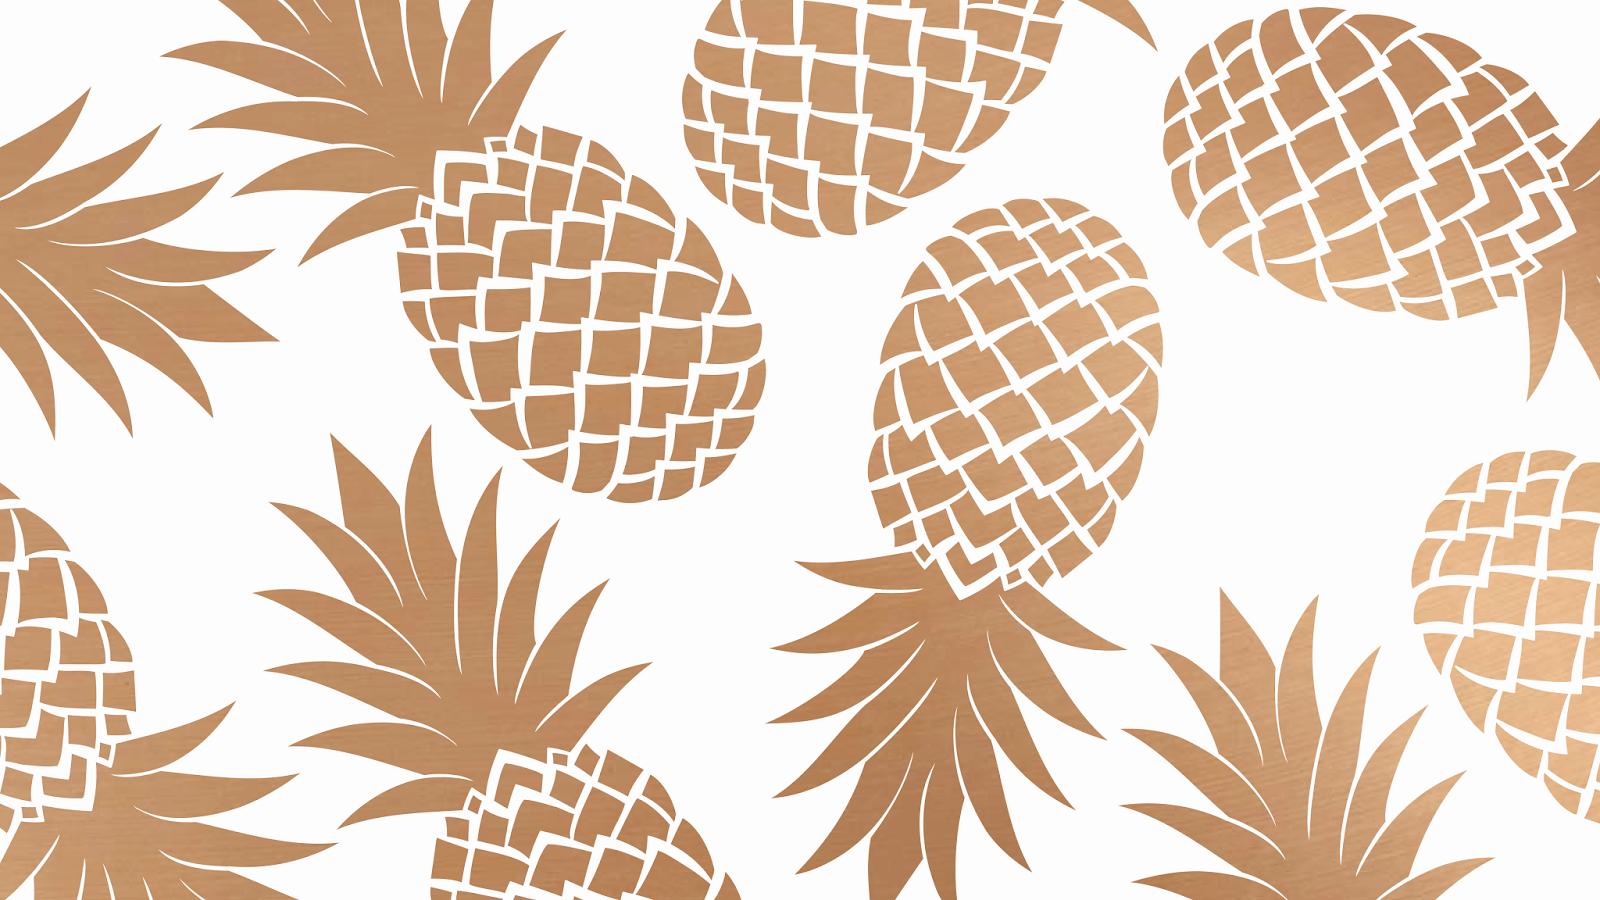 Download wallpaper 1920x1080 pineapple fruit tropical minimalism full hd  hdtv fhd 1080p hd background